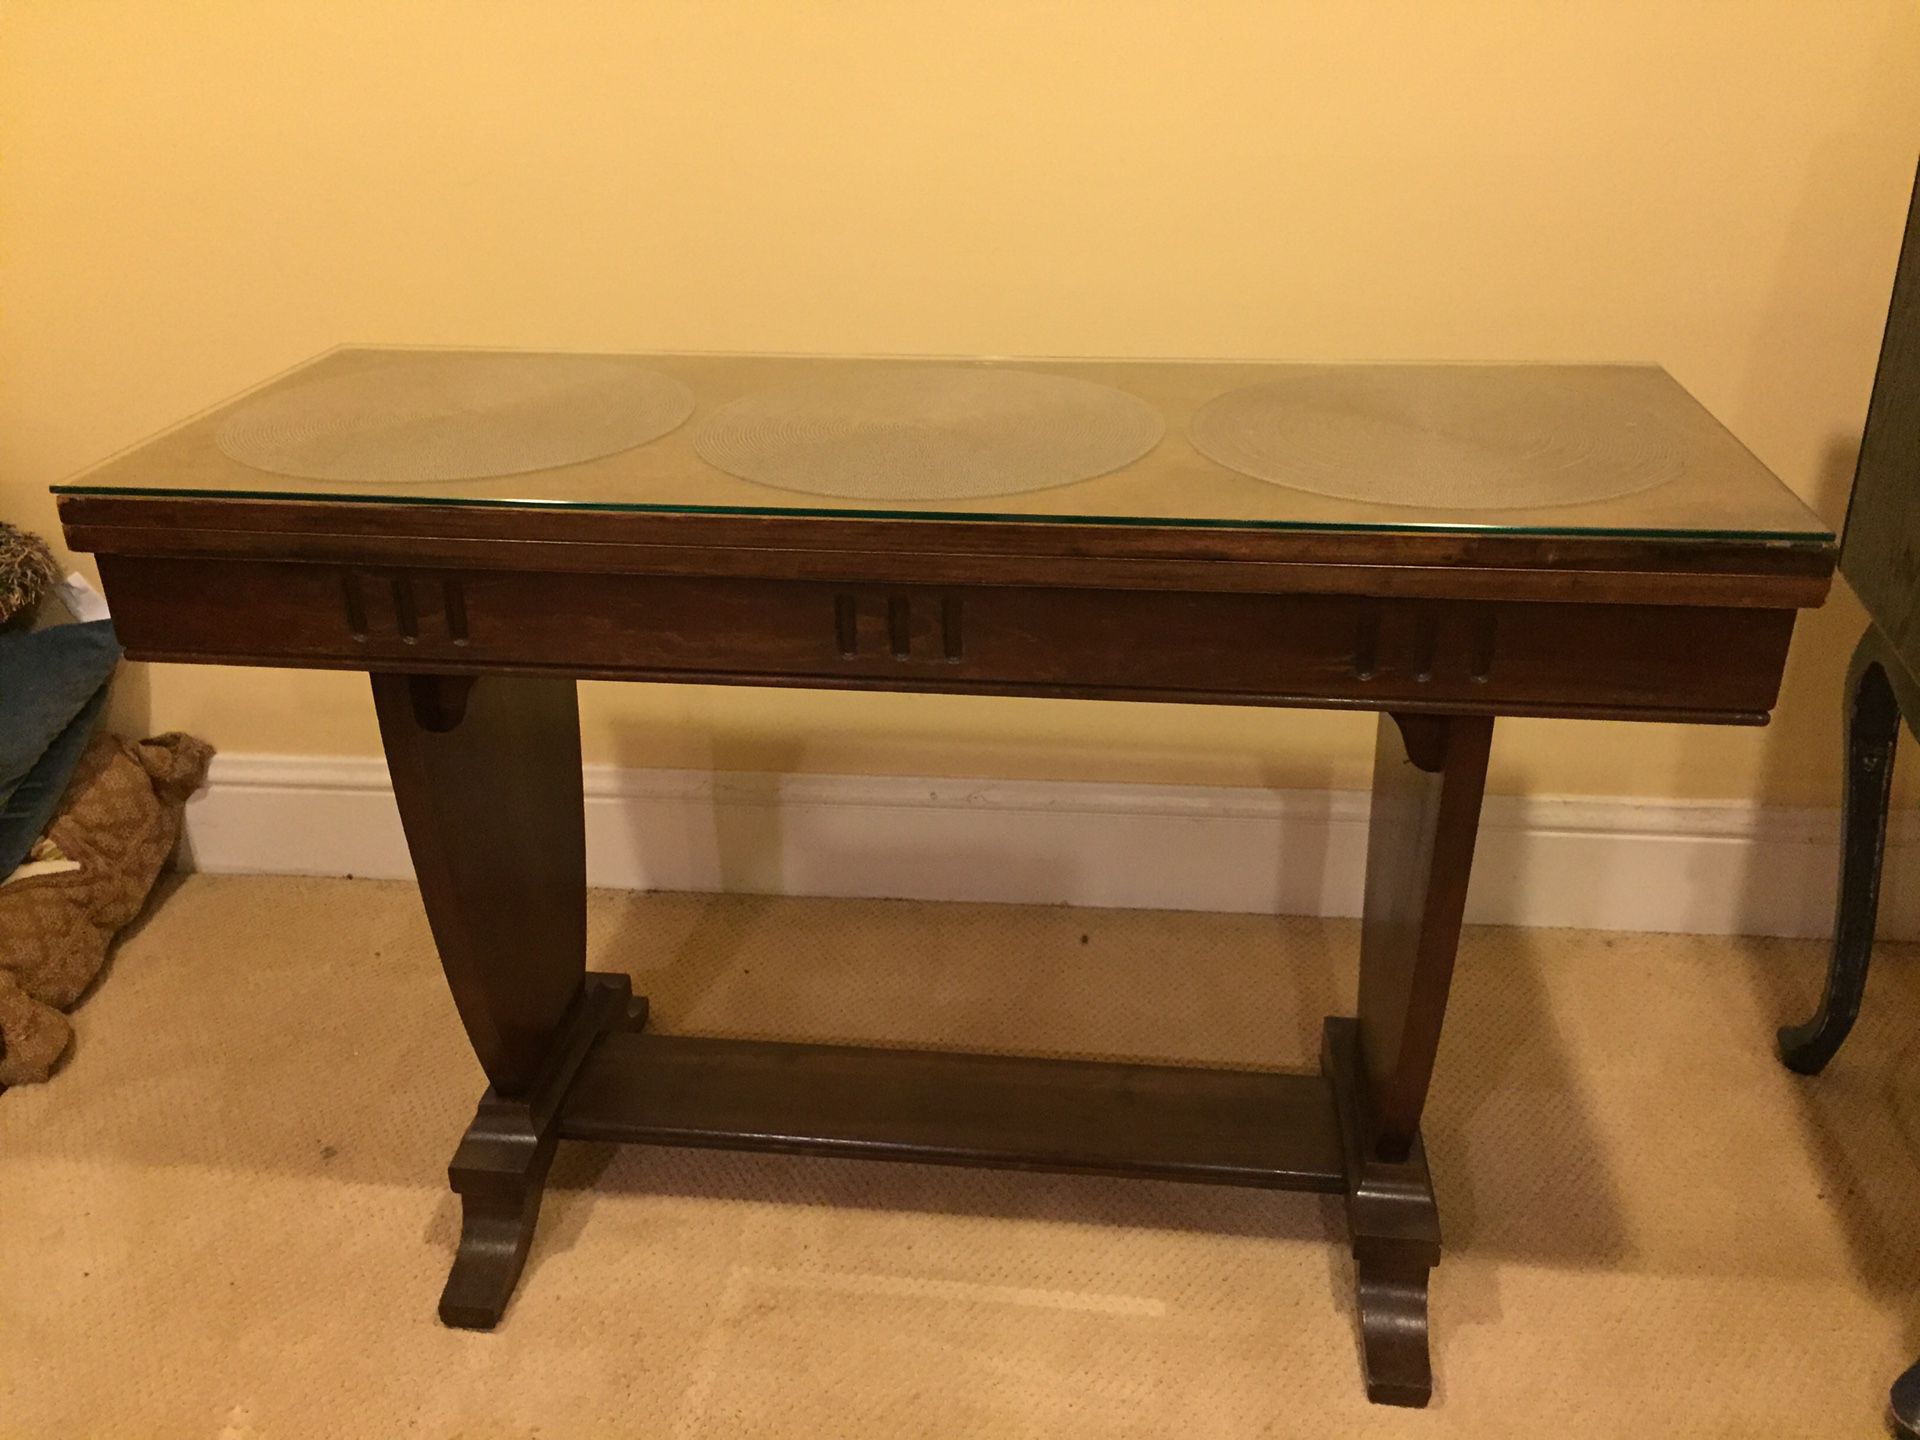 Antique gathering table